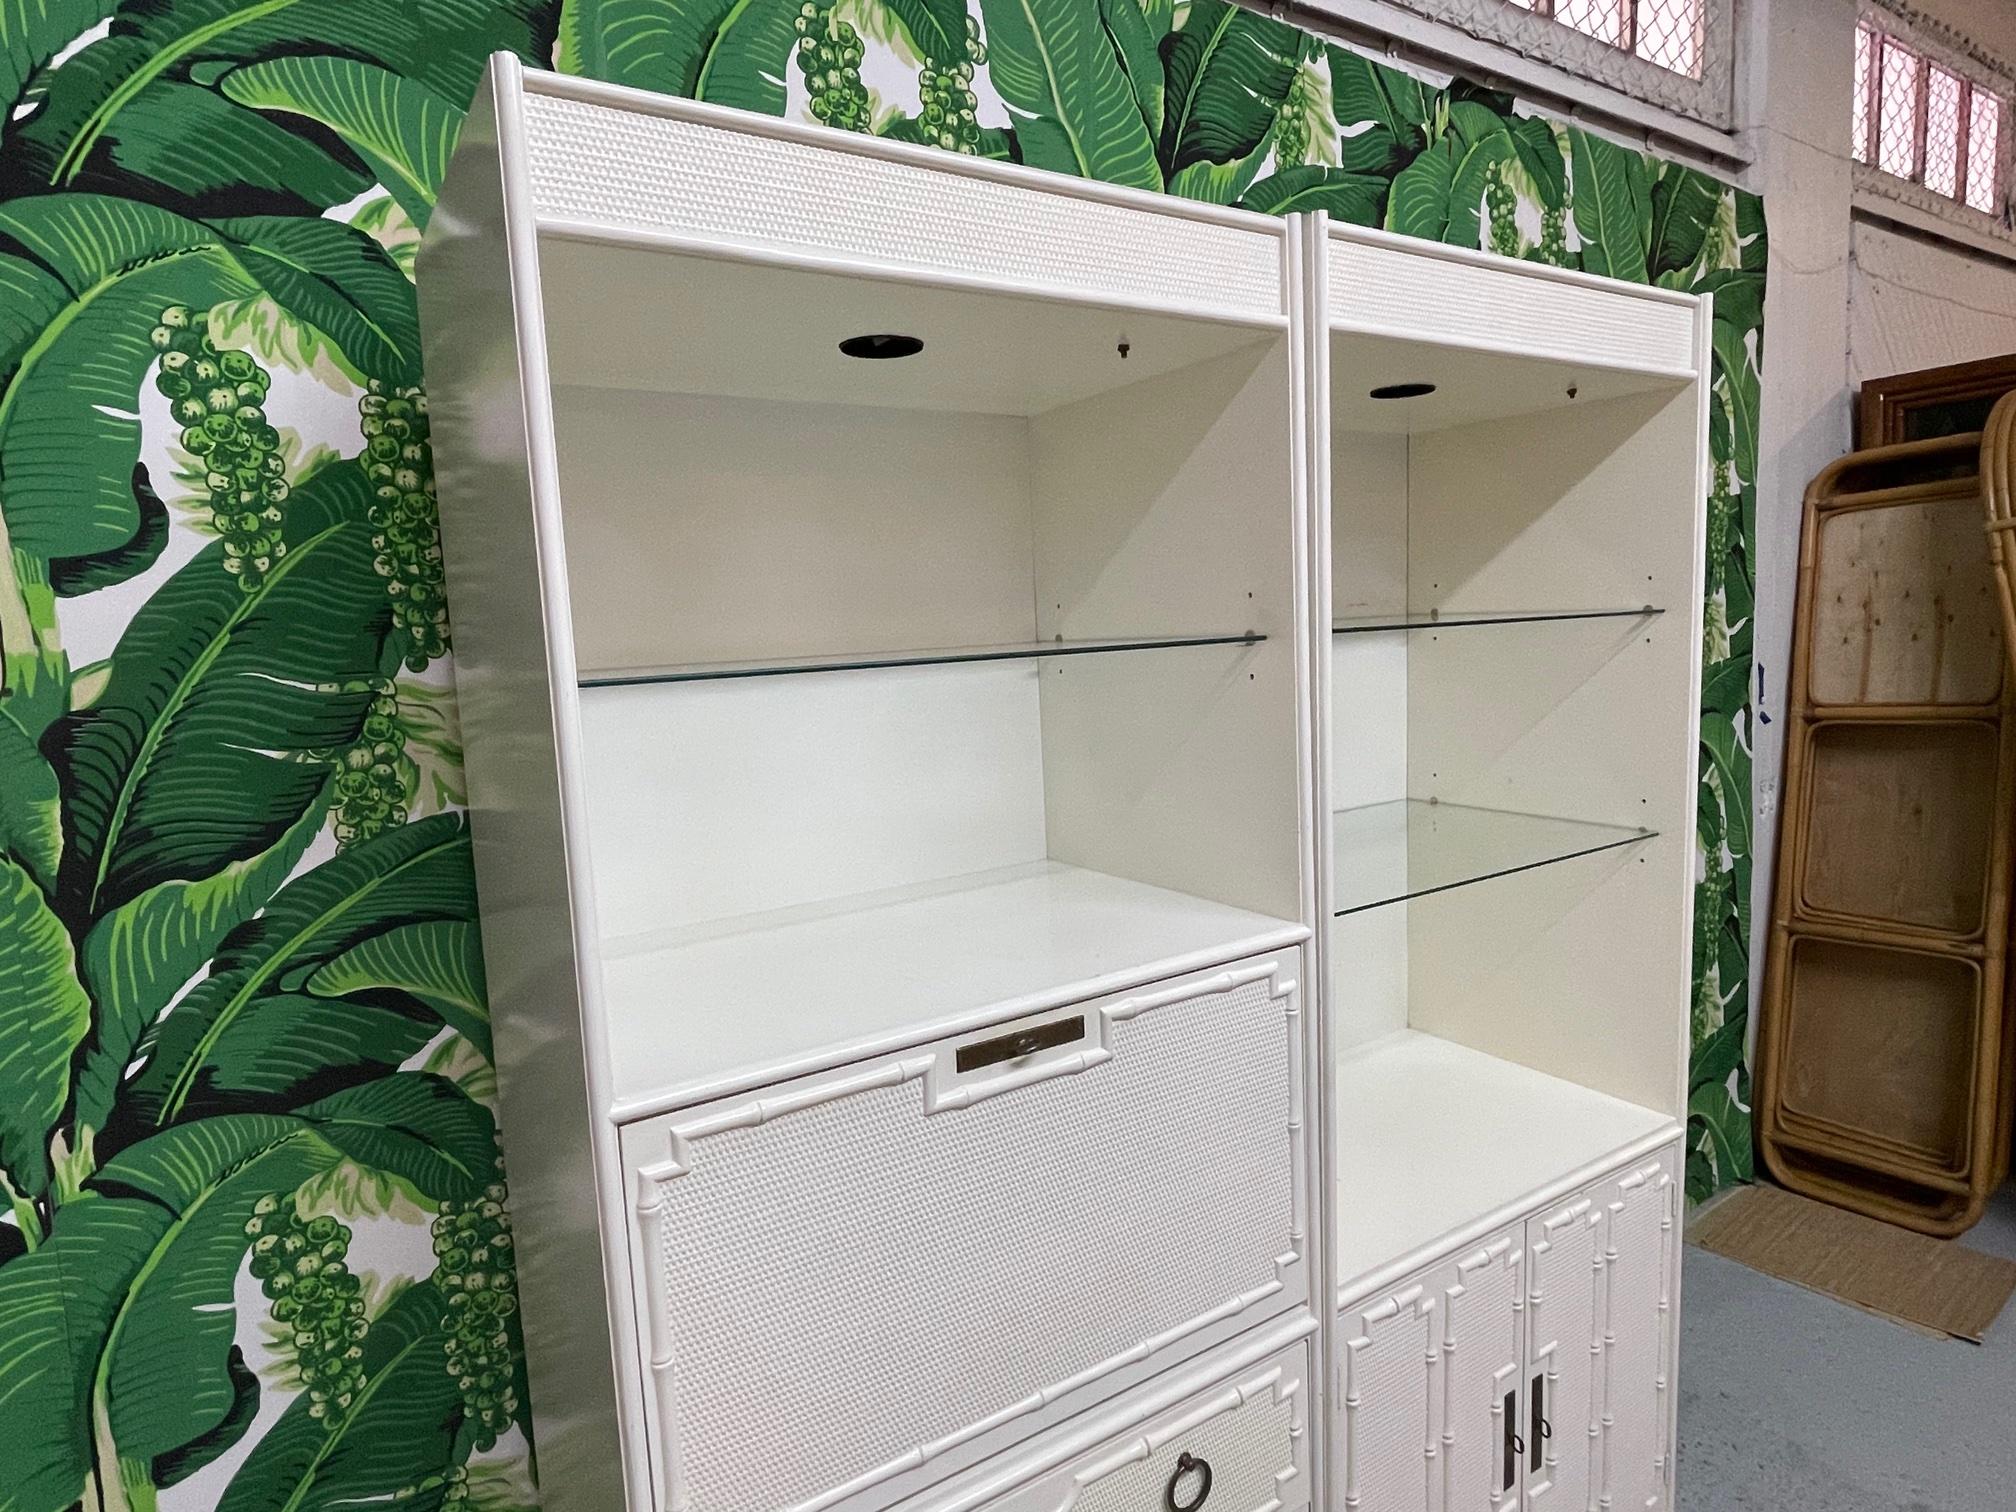 Two-piece lighted bookshelf/étagère/wall unit features bright white finish and glass shelving. Drop desk and 3 drawers in one unit along with shelving and double door storage in the other. Faux bamboo detailing. Attributed to Omega. Good condition